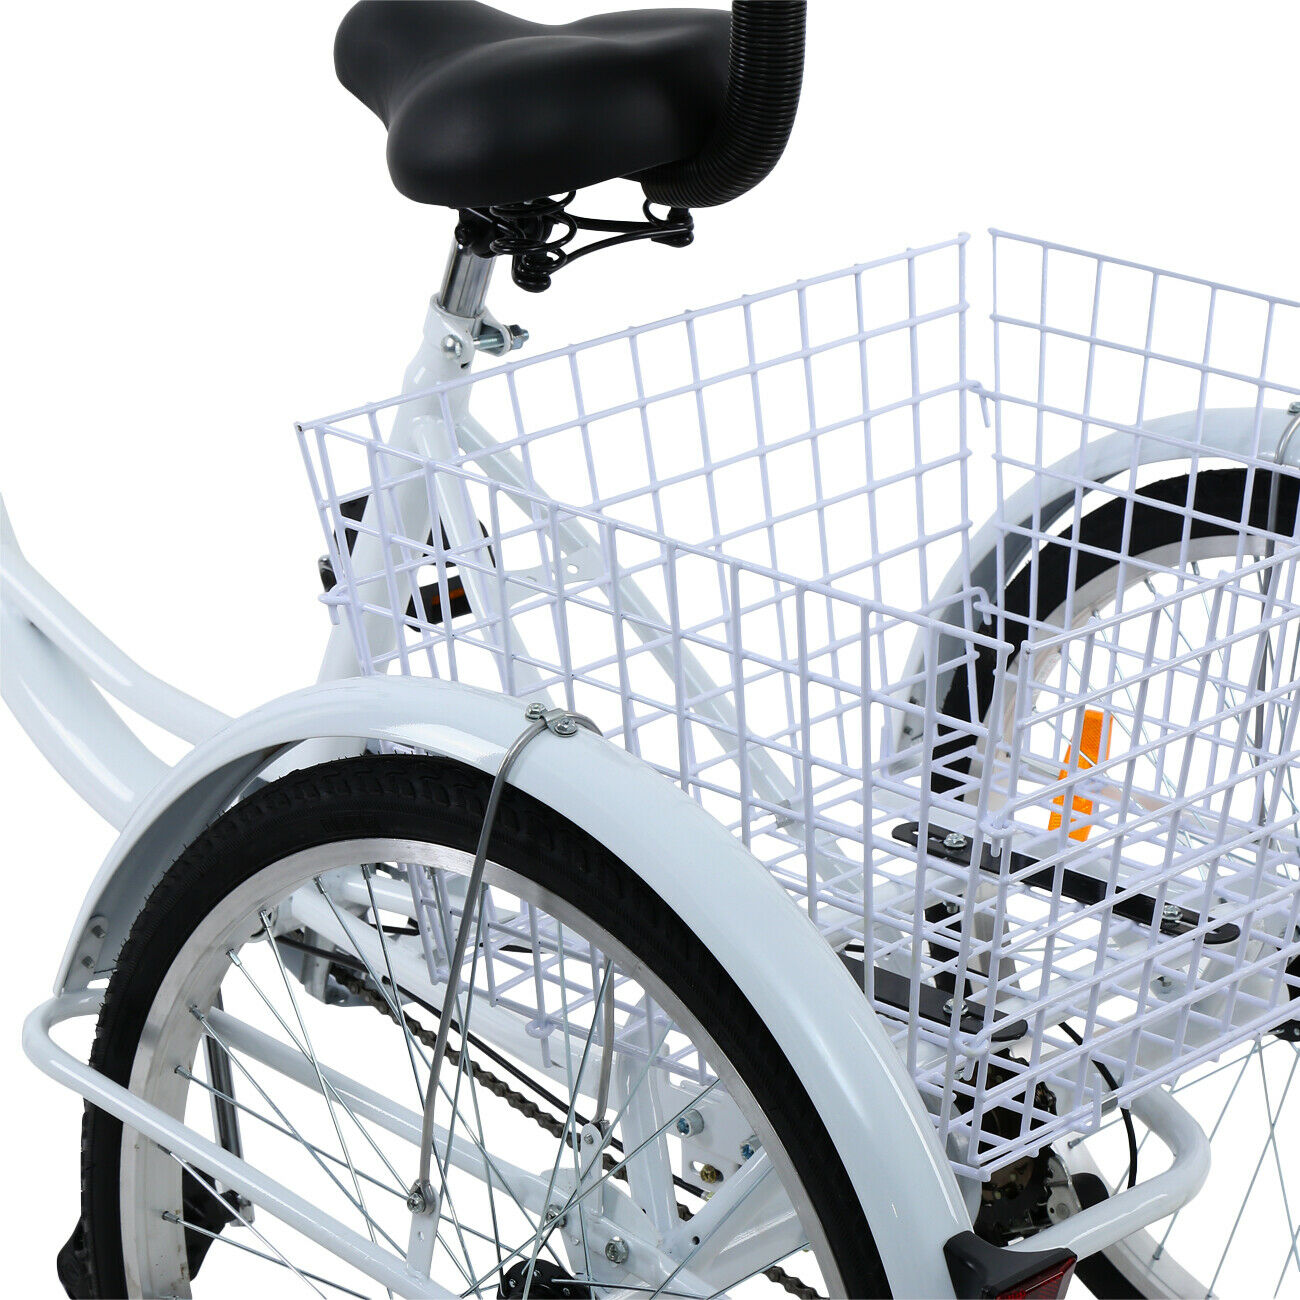 7 Speed 24 Inch Adult Tricycle With Shopping Cargo Basket,  White or Yellow